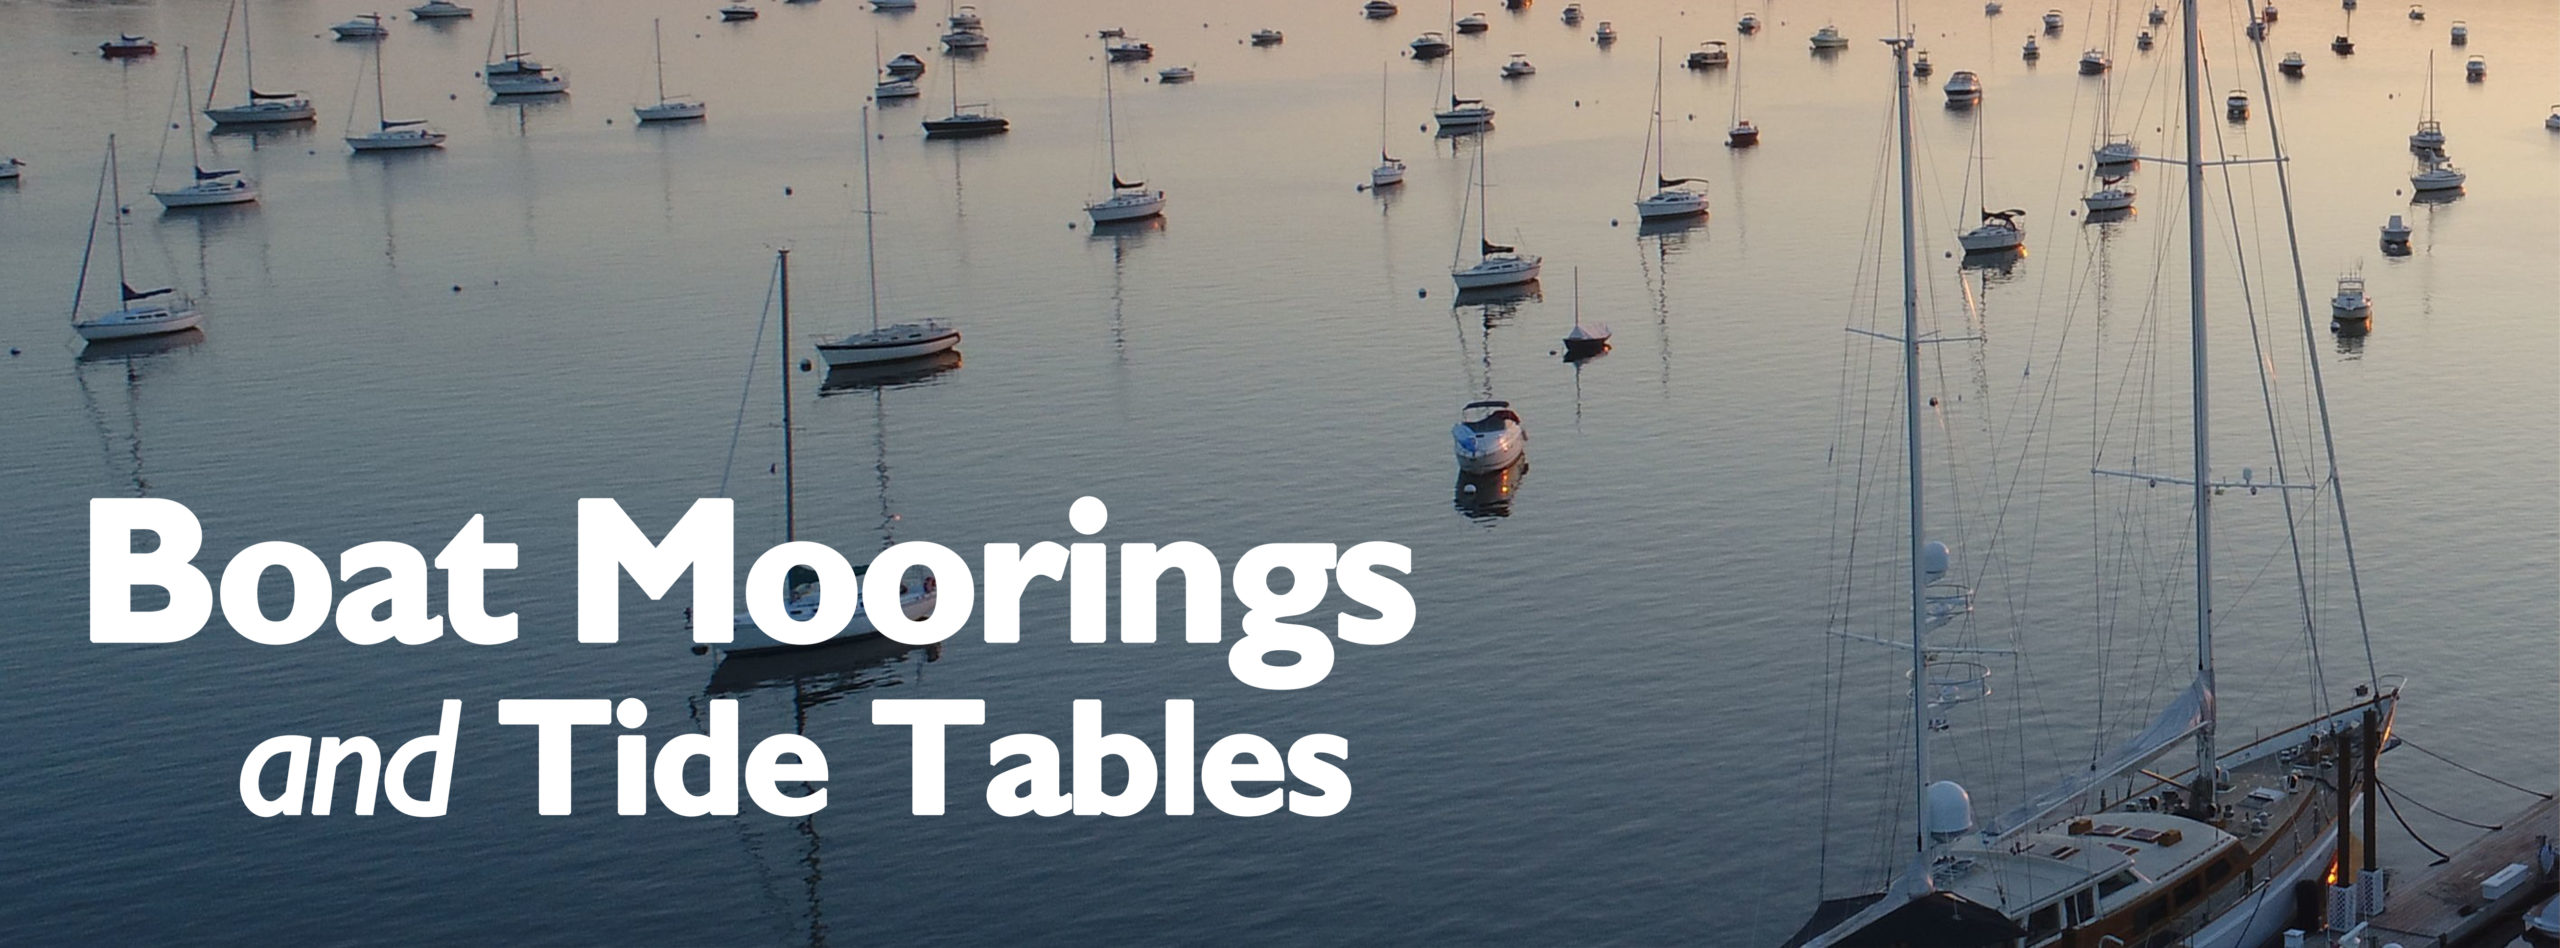 Boat Moorings and Tide Tables – Town of Oyster Bay